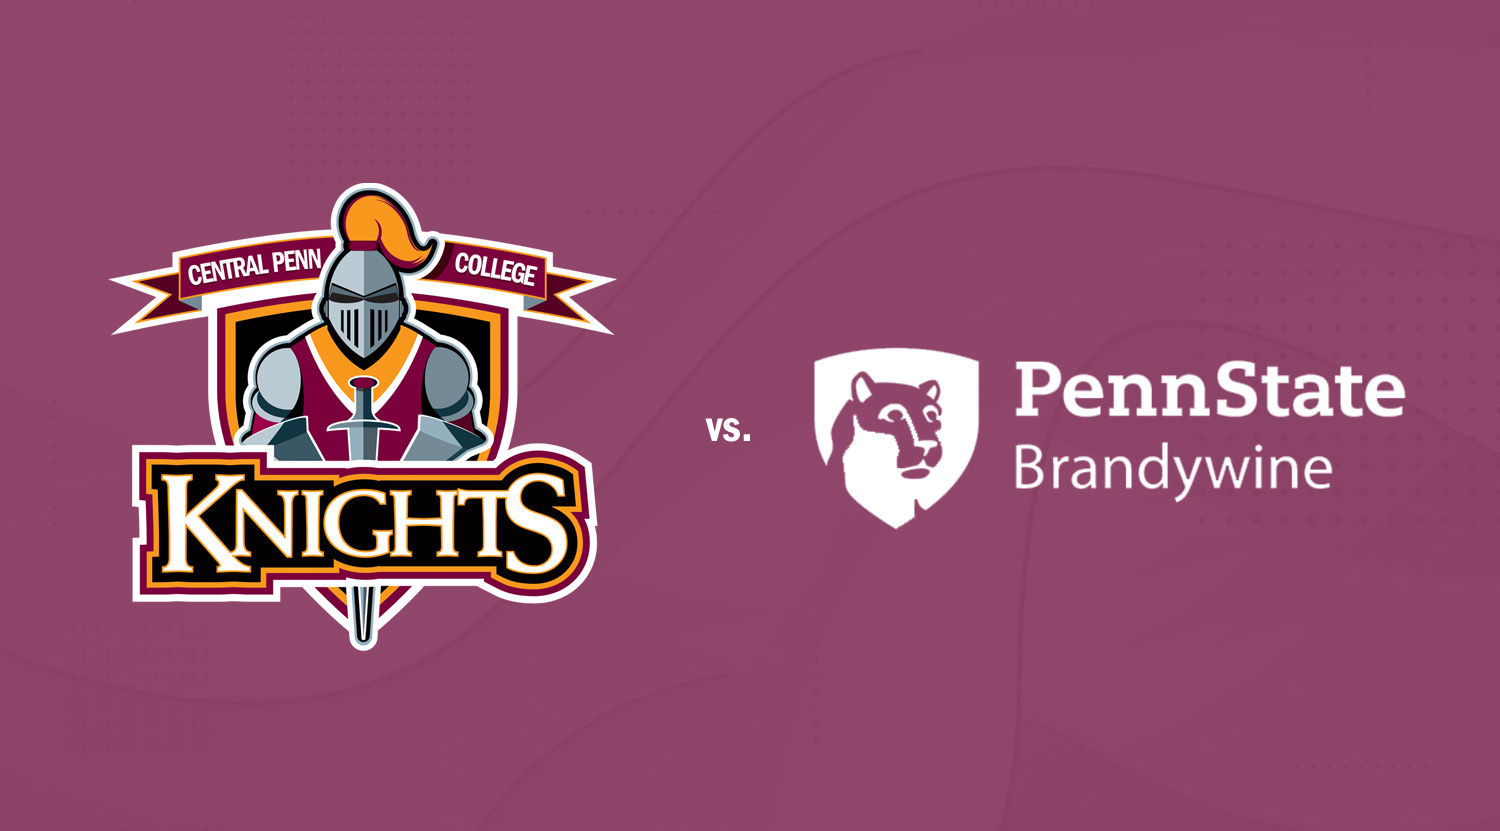 Central Penn Knights basketball drops doubleheader to PSU Brandywine